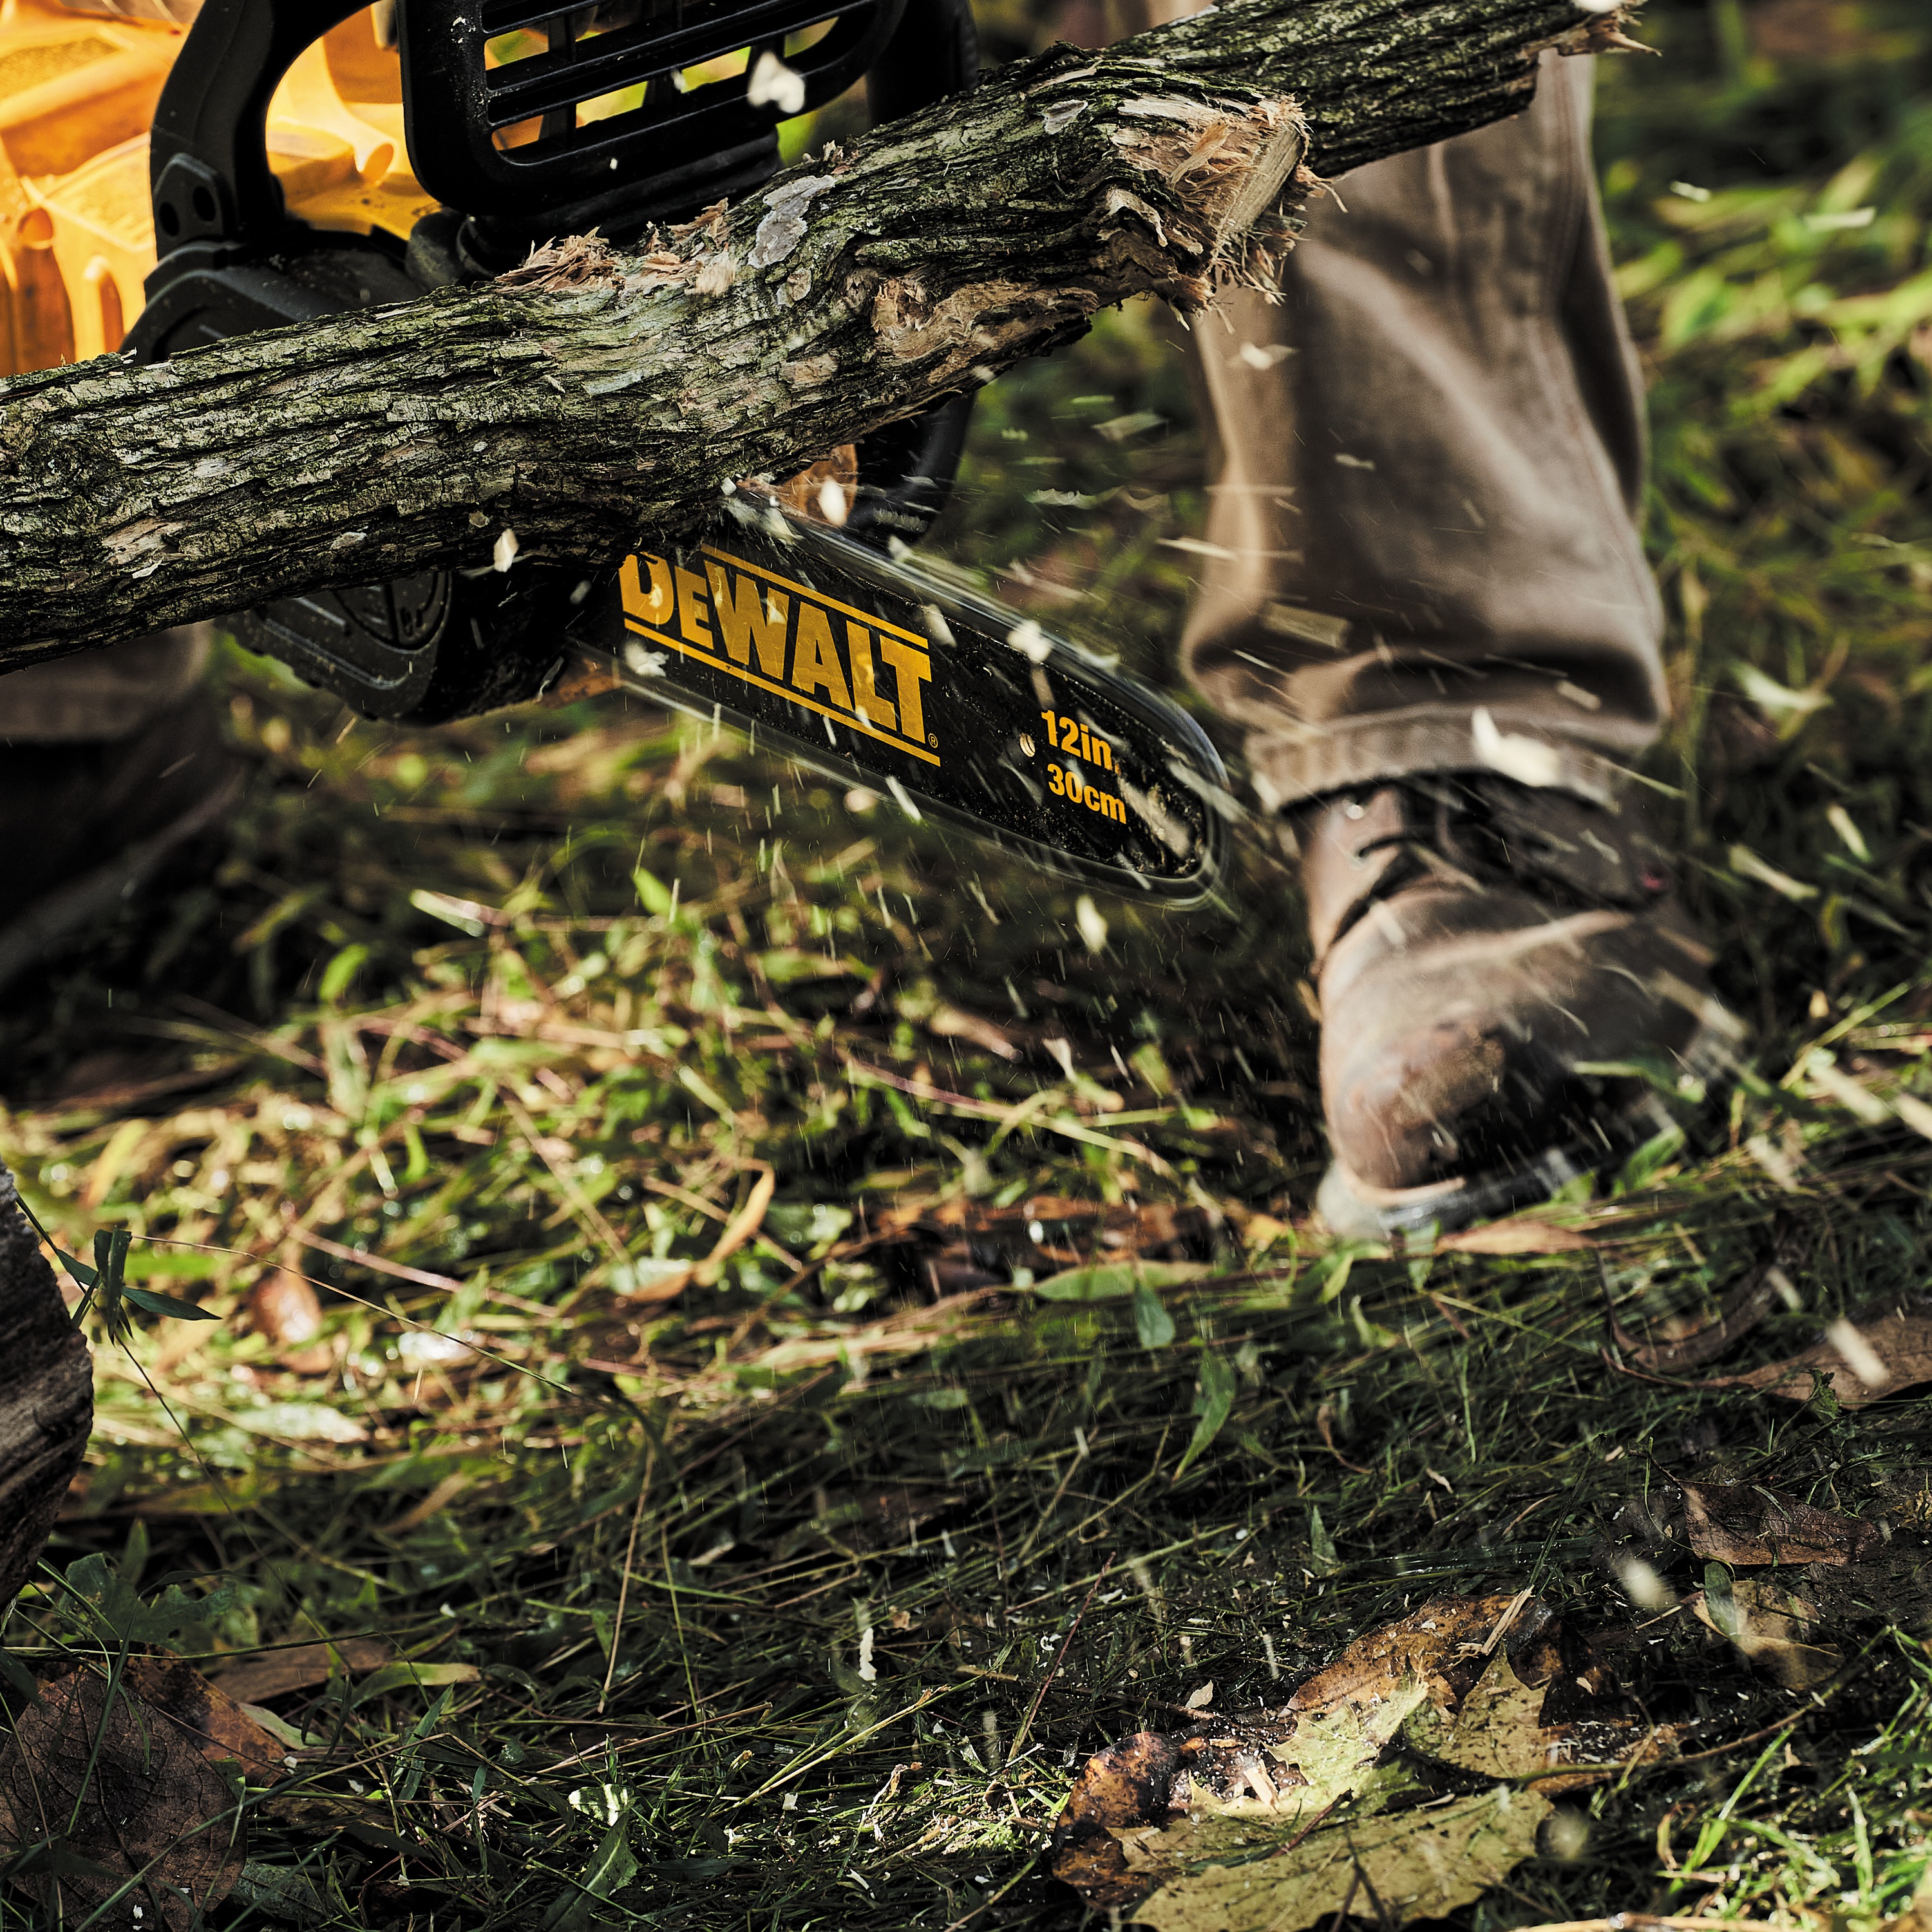 FLEXVOLT Cordless Chainsaw being used by a worker to cut large, thick tree trunks outdoors